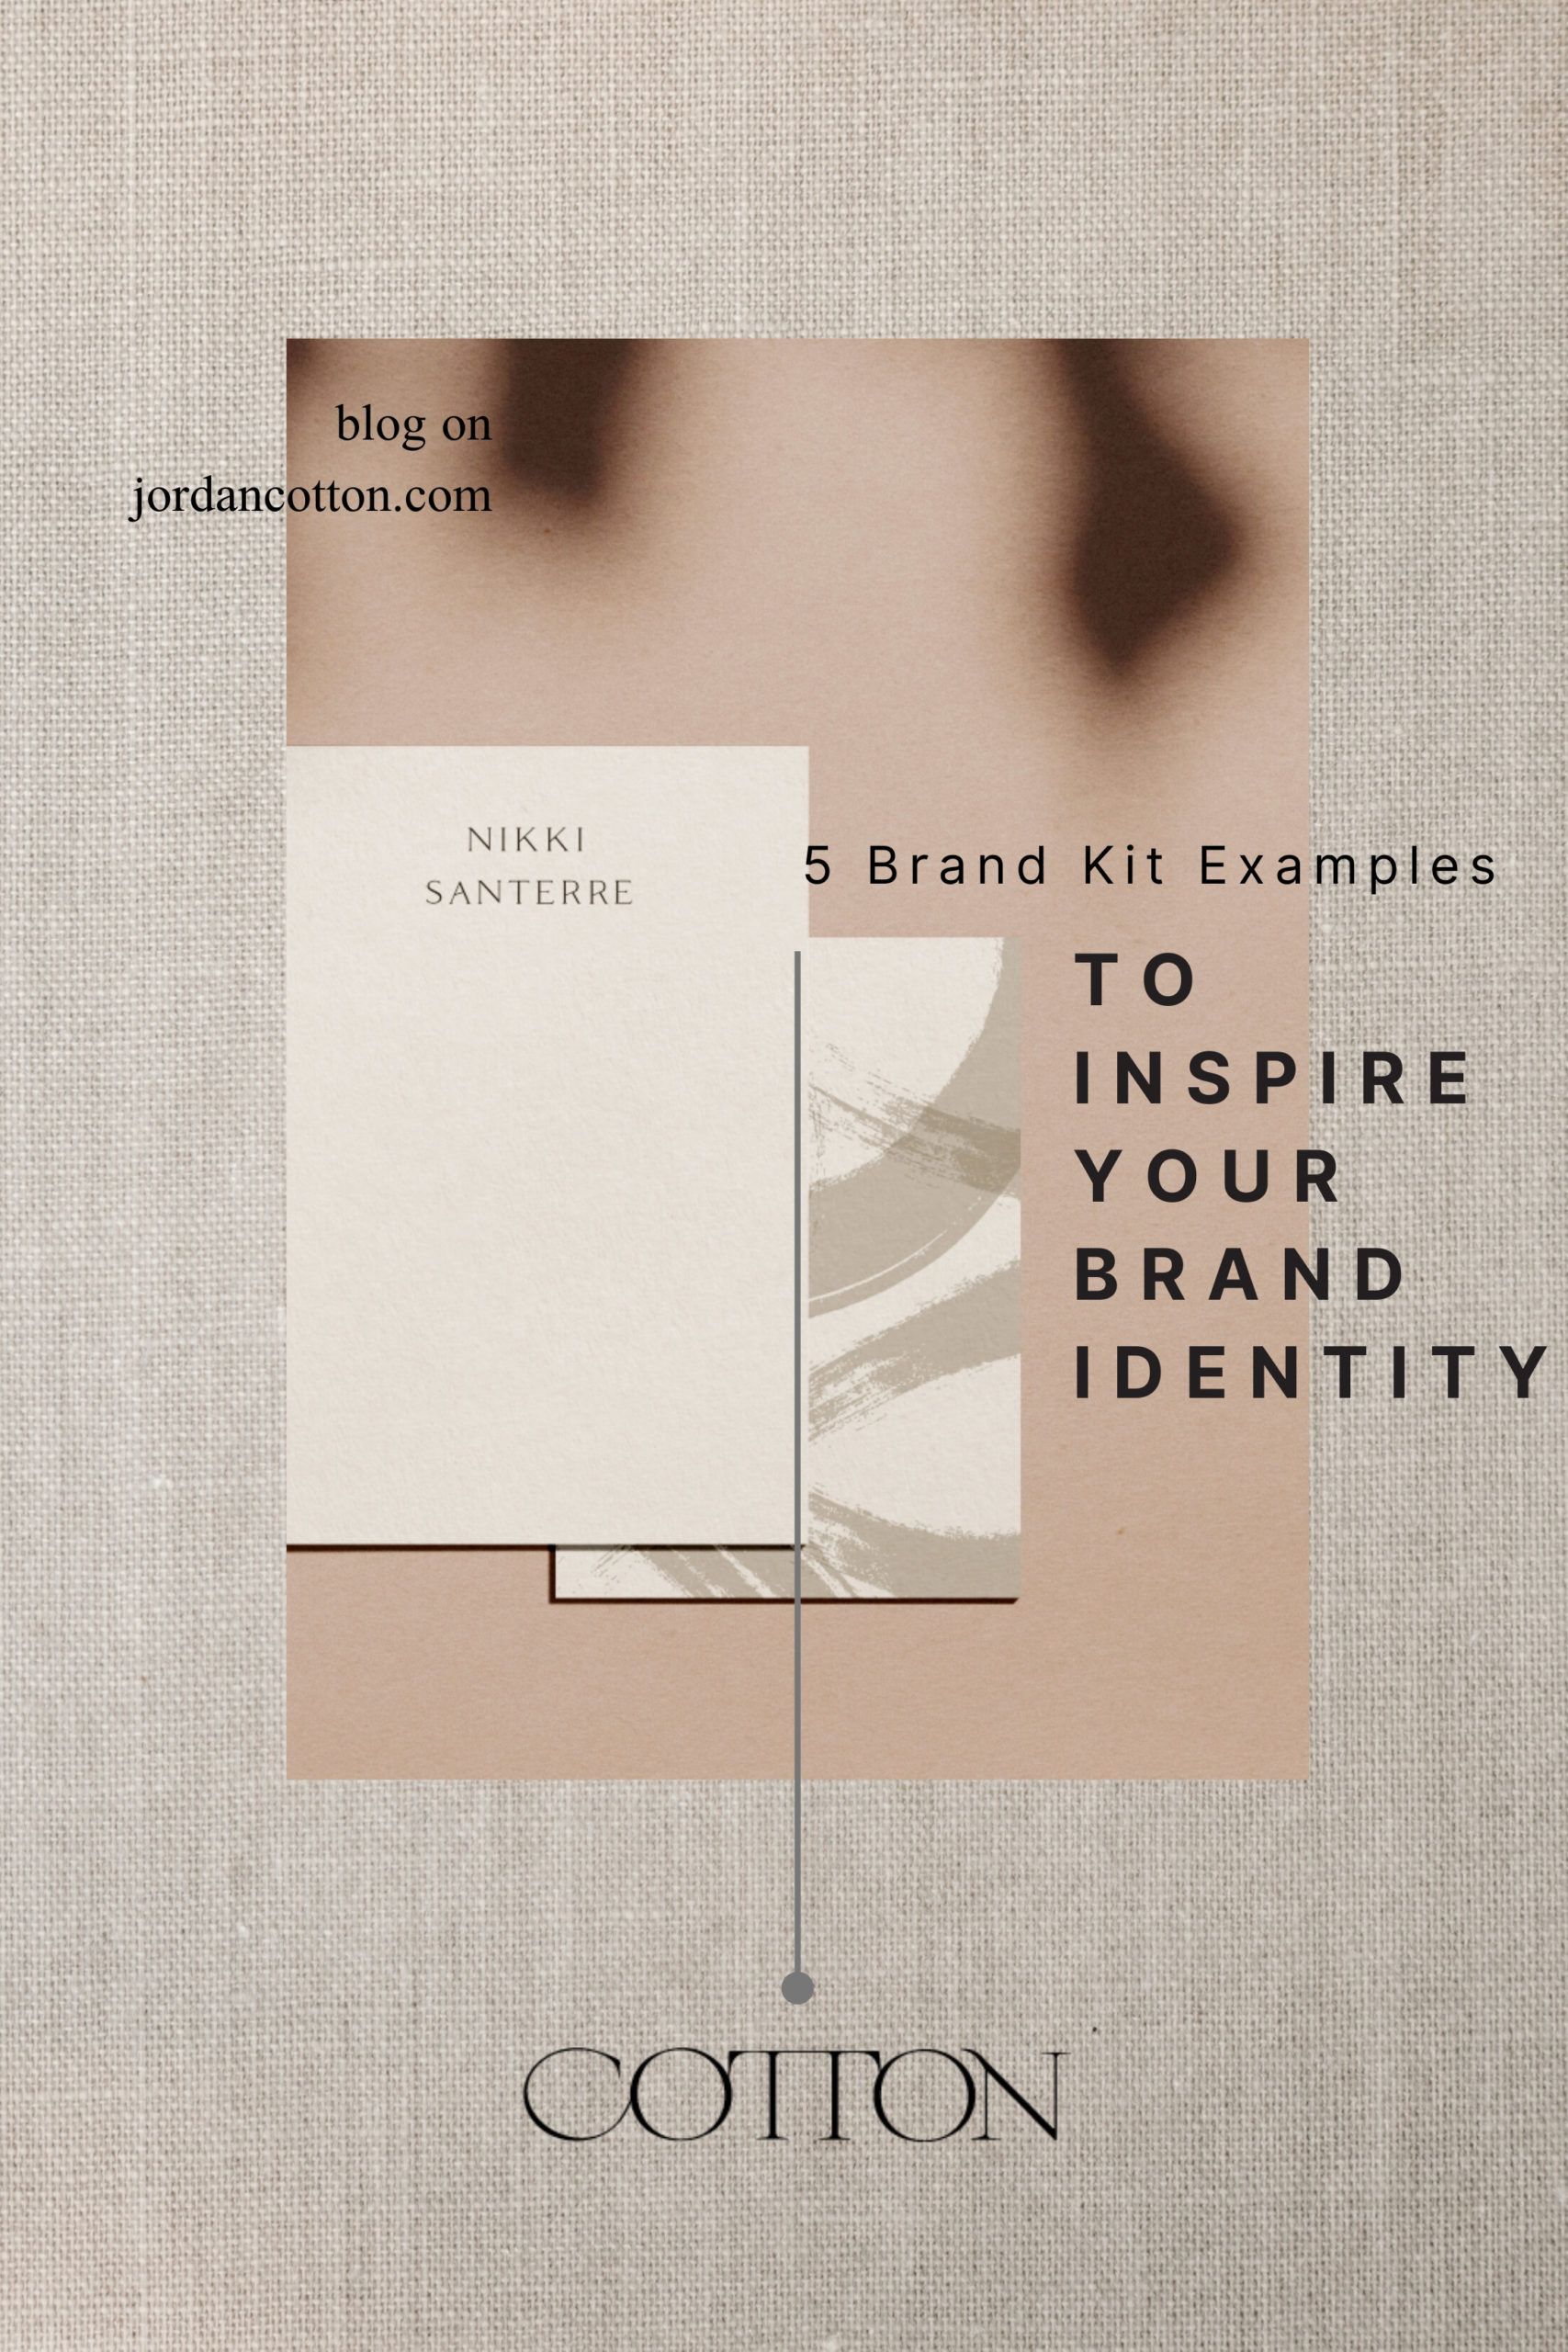 5 Brand Kit Examples to Inspire Your Brand Identity